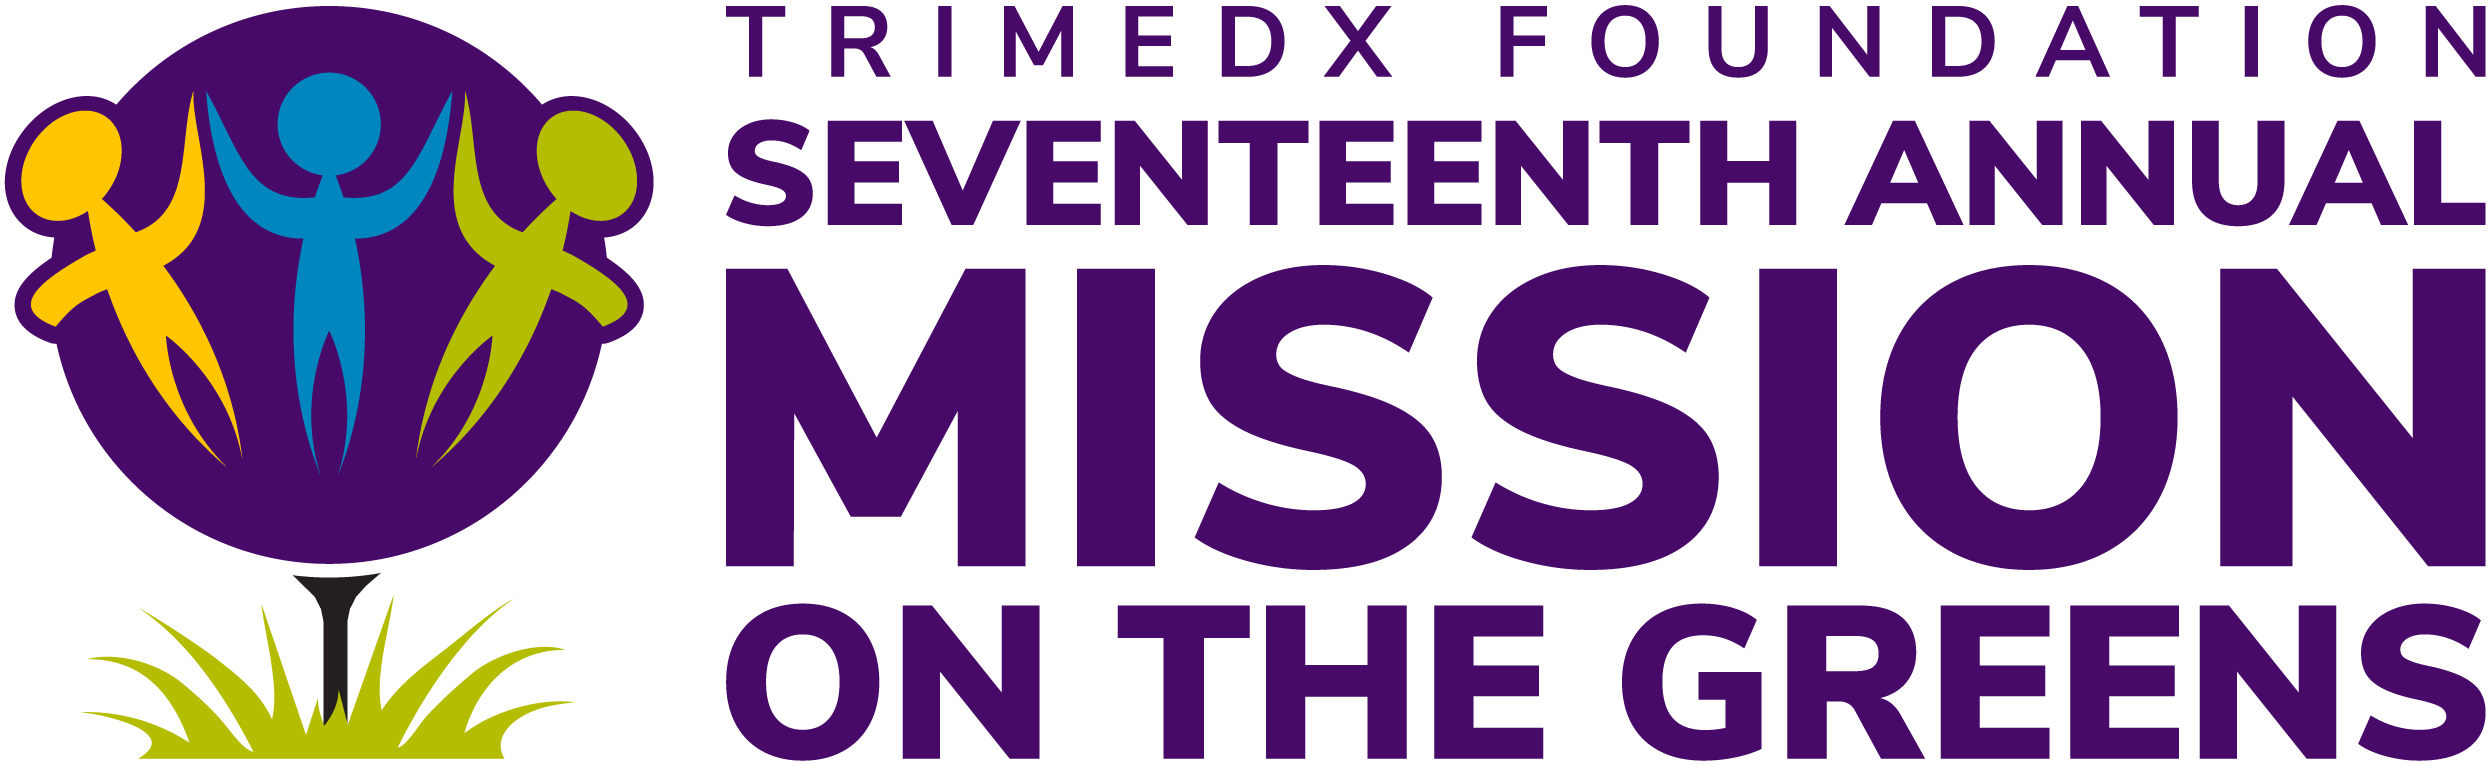 TRIMEDX Foundation Seventeenth Annual Mission on the Greens logo